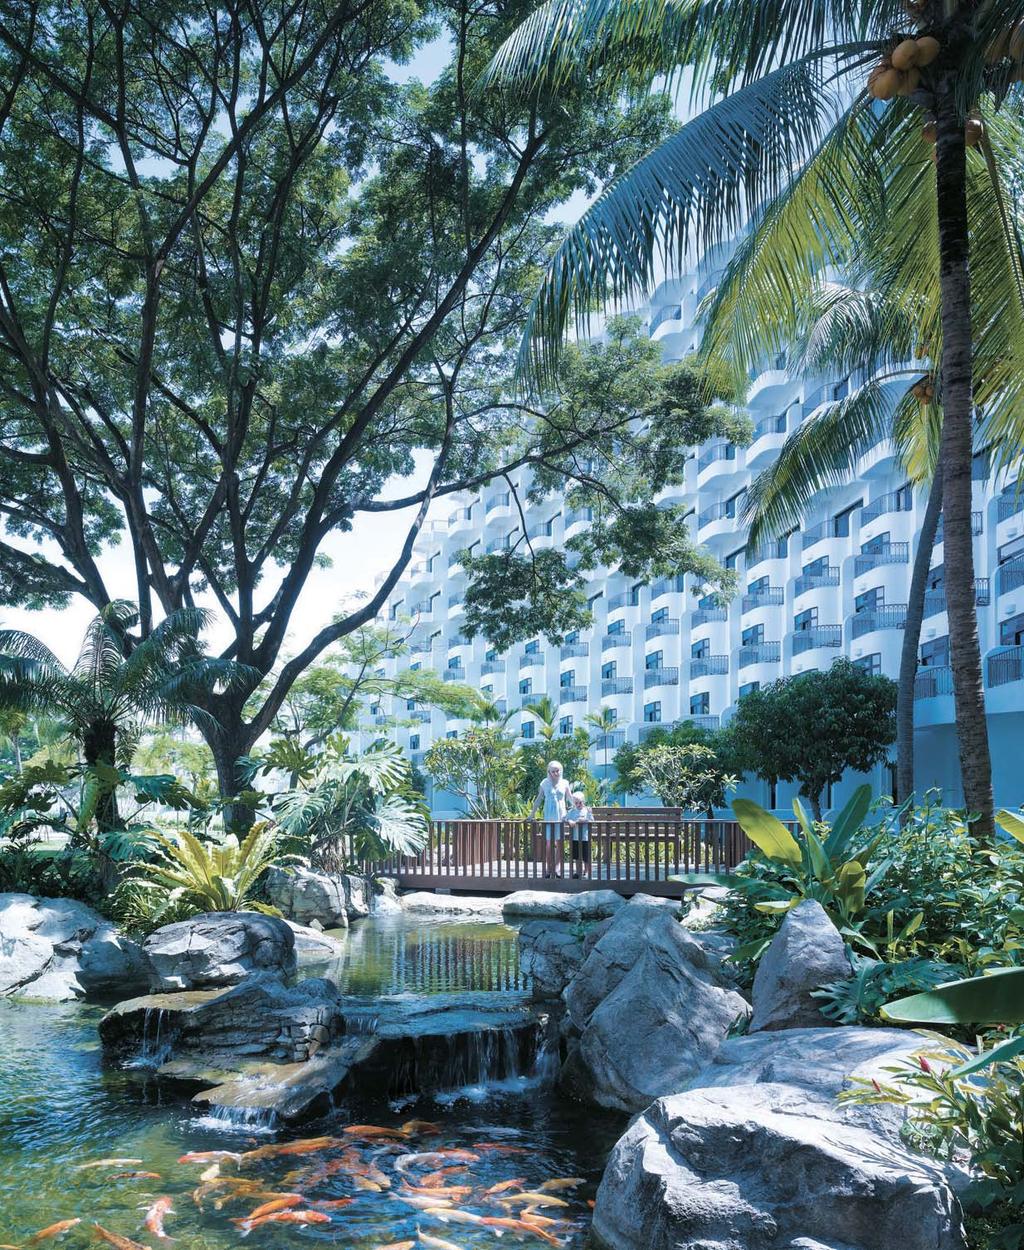 the limousine rolled slowly up the driveway of the resort, where we were greeted with pristine landscaped gardens and a quaint little waterfall cascading gently by the lobby entrance.